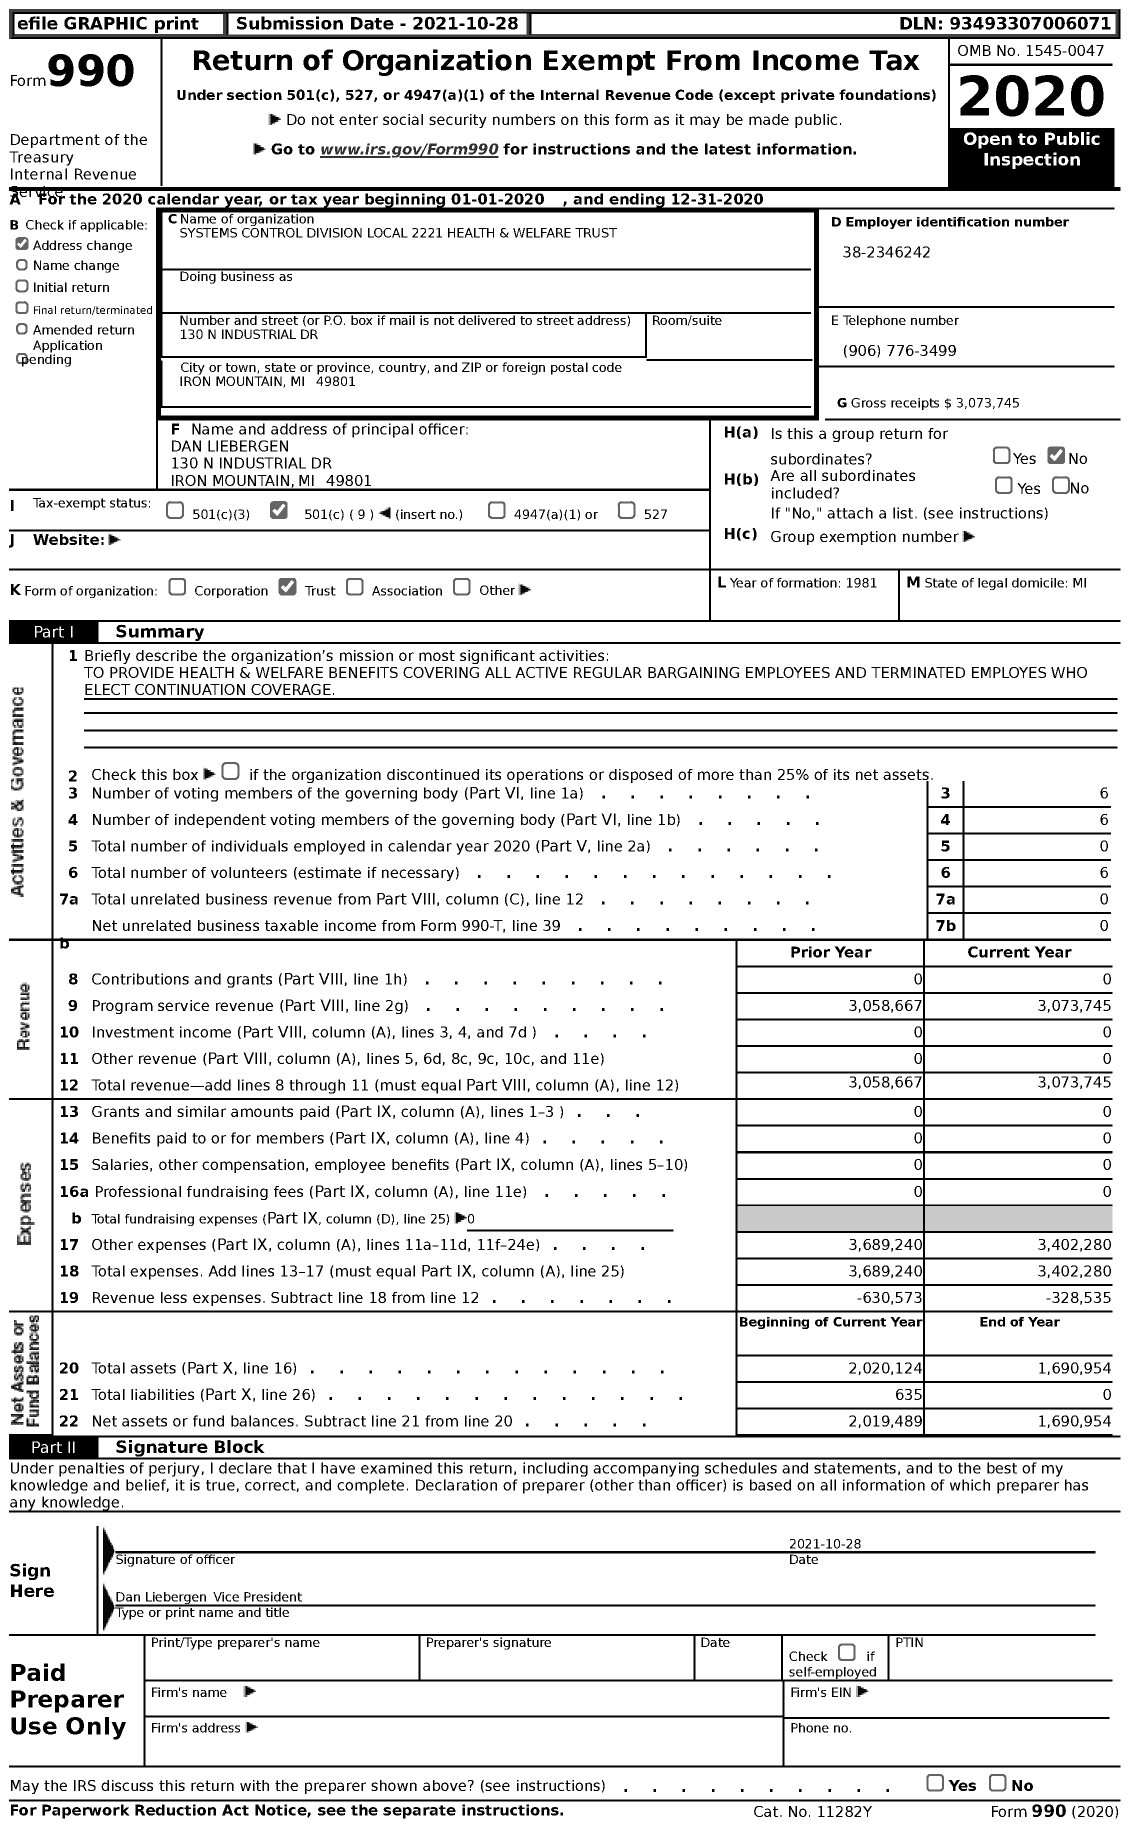 Image of first page of 2020 Form 990 for Systems Control Division Local 2221 Health and Welfare Trust